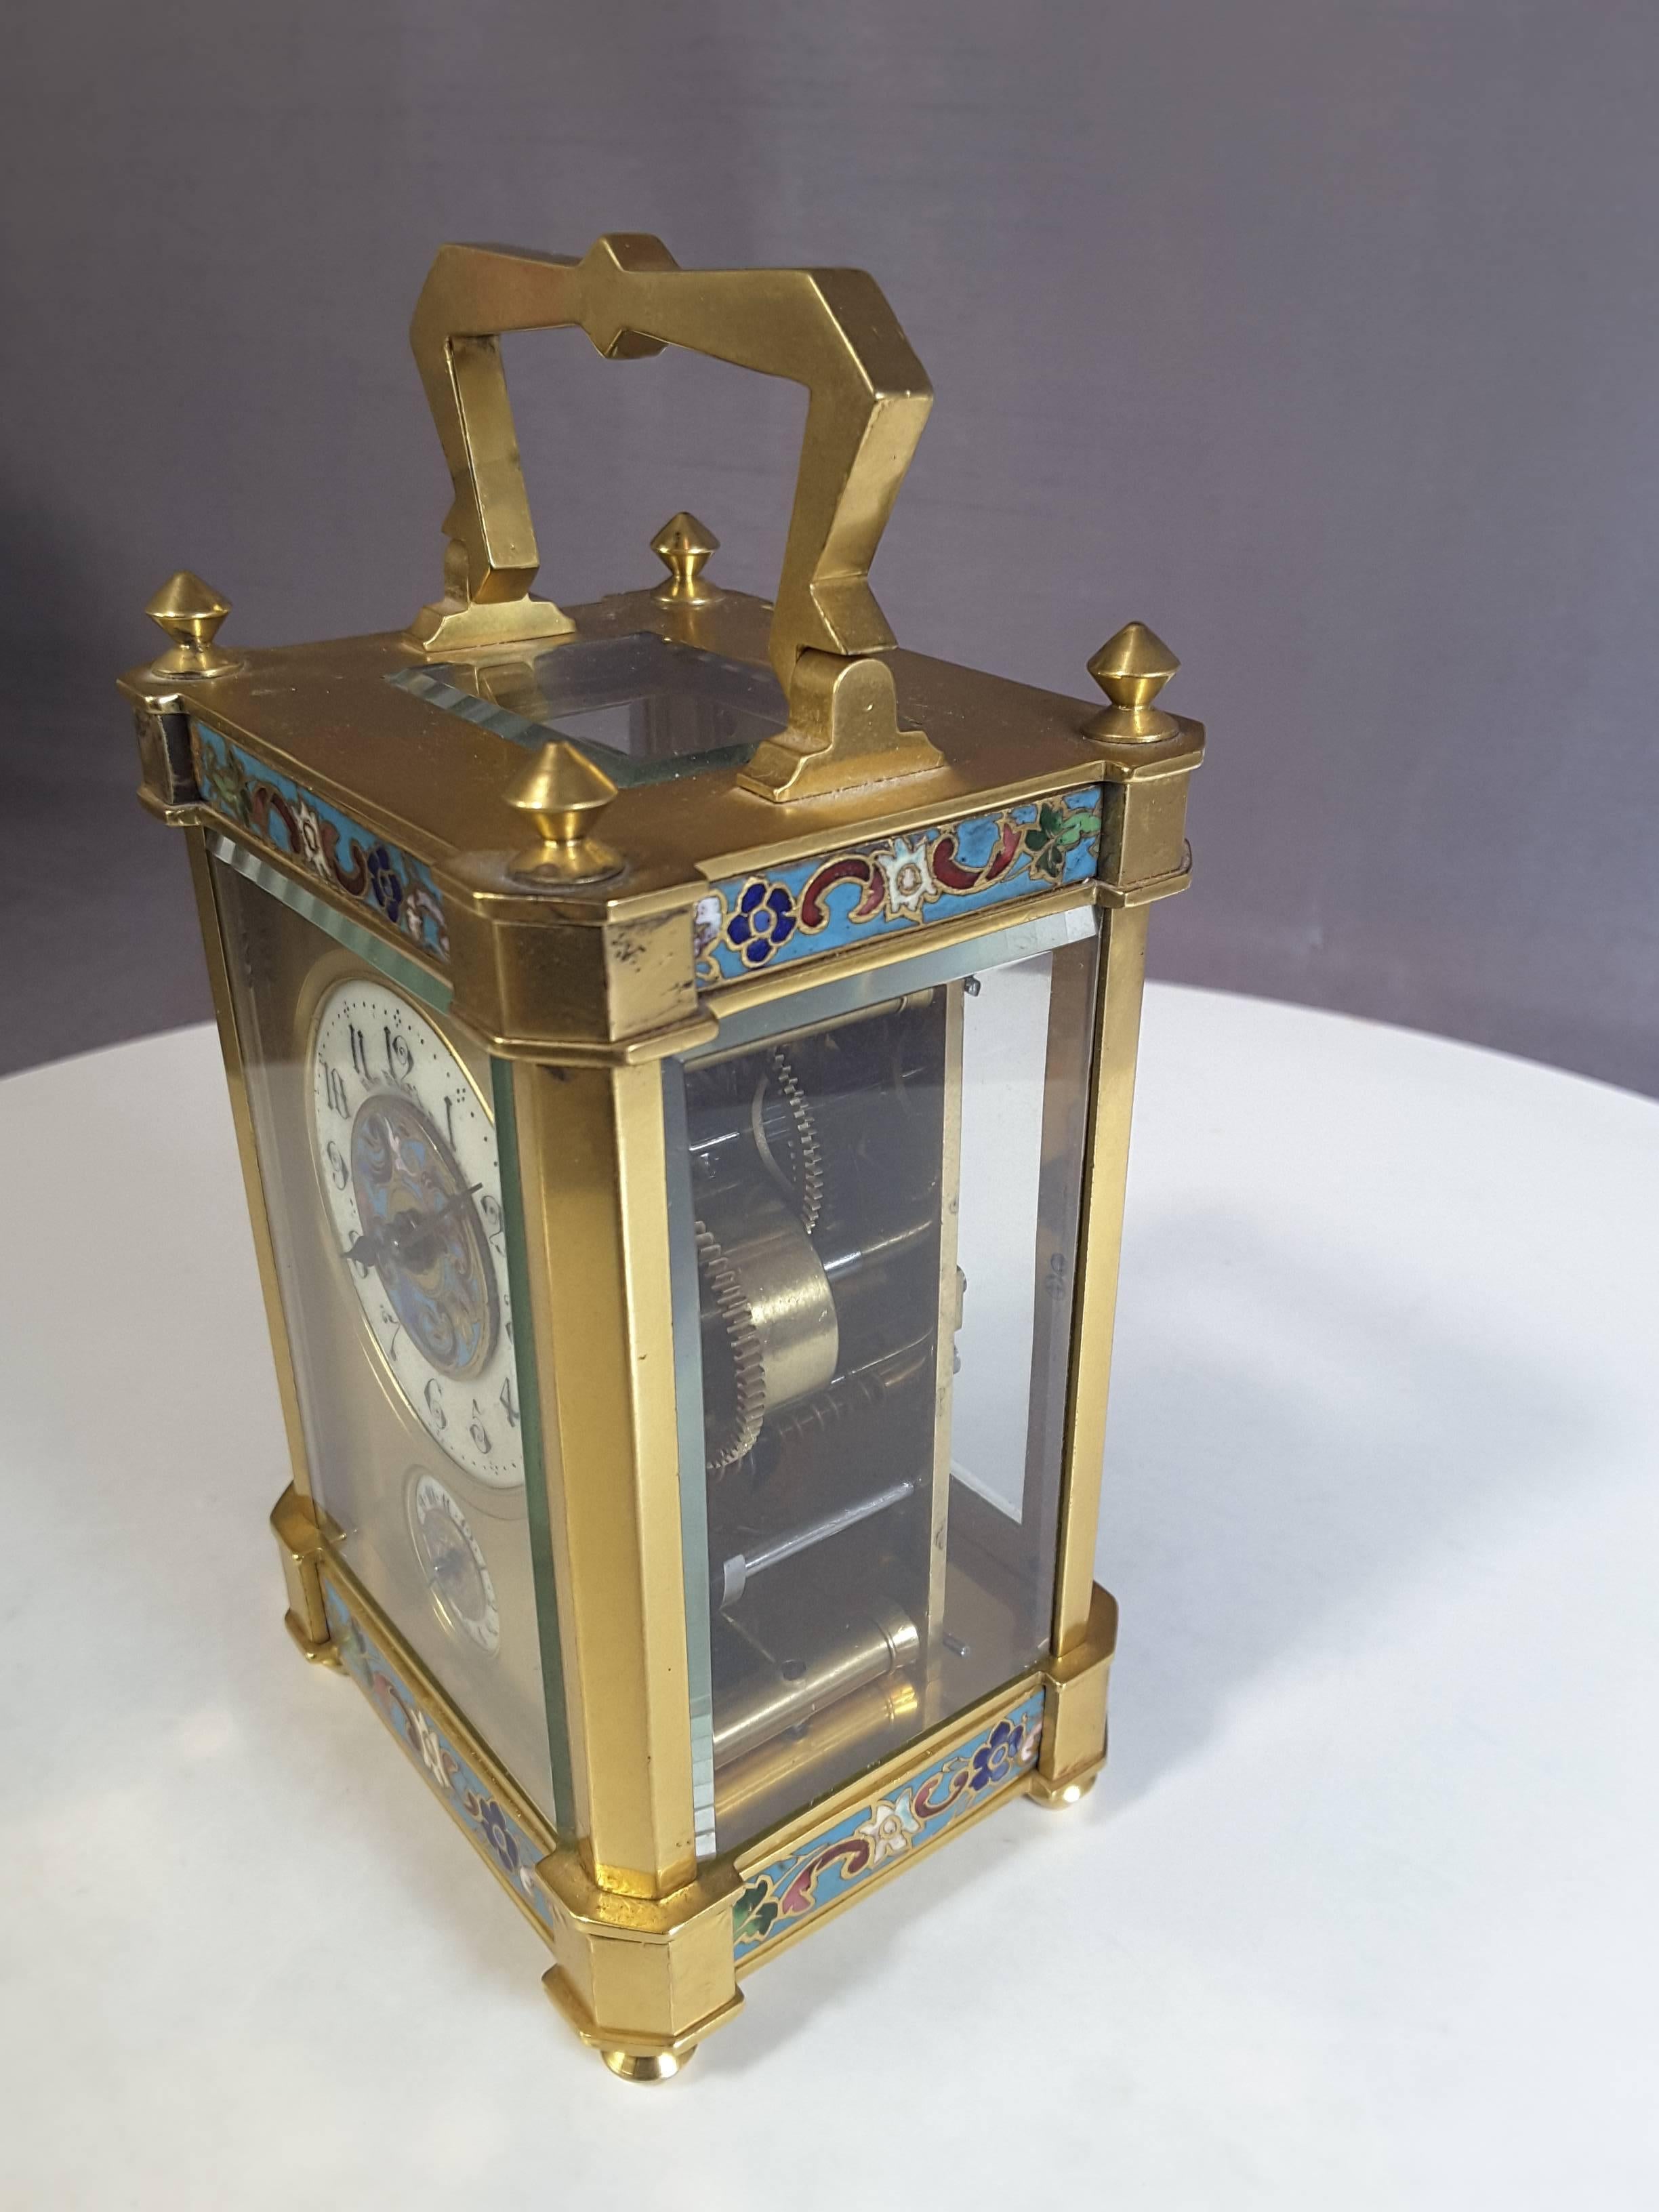 French carriage clock with champlevé decoration, gilt brass case, eight day movement with alarm, in pristine working condition, time and alarm, upper and lower dials in the original travel case, with key, clear glass display and exterior cover,